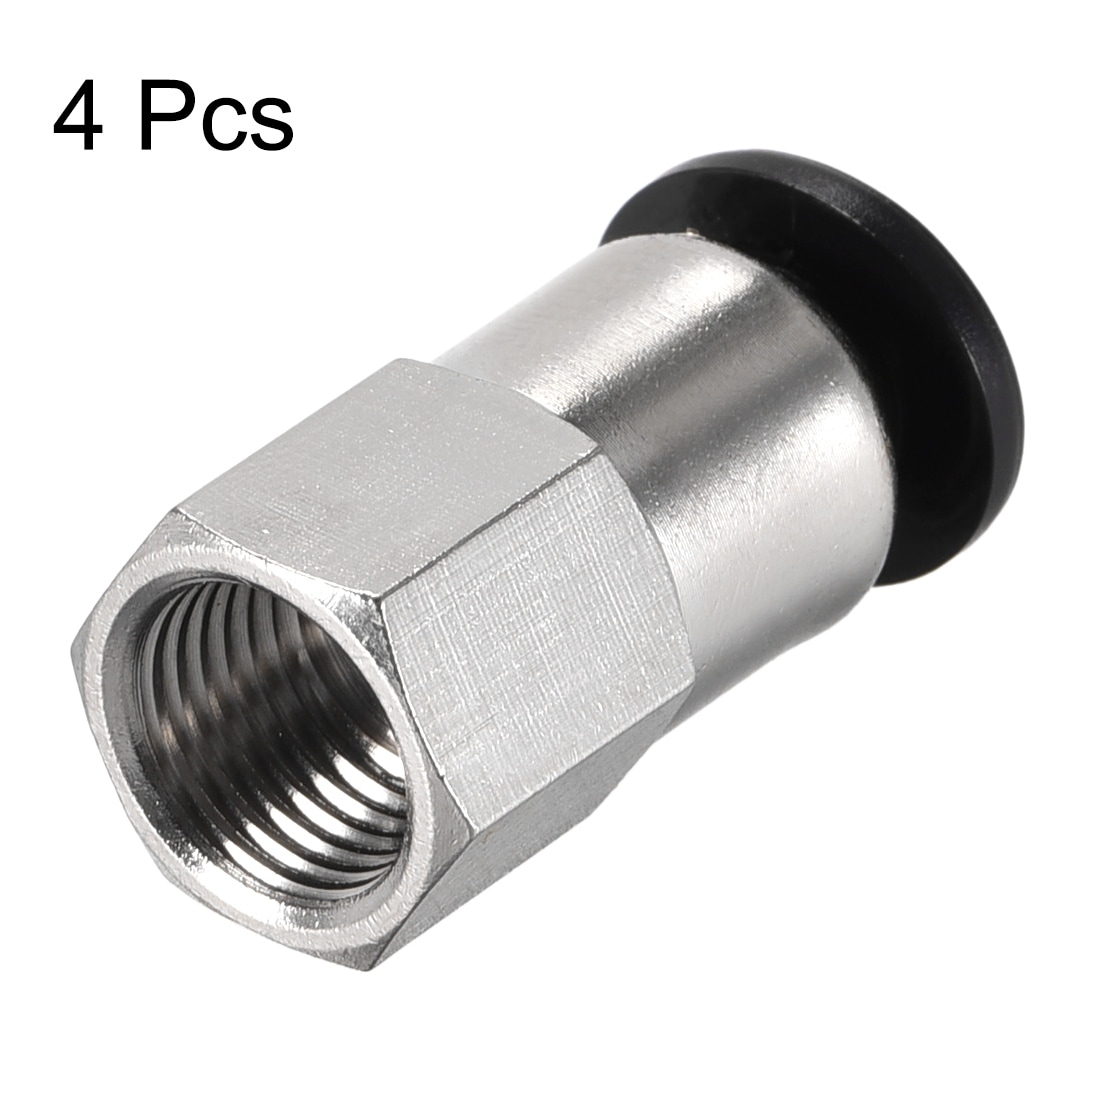 NYCOIL 56888 1/2" x 1/2" NPT Push-to-Connect Male Connector Tube Fitting Brass 